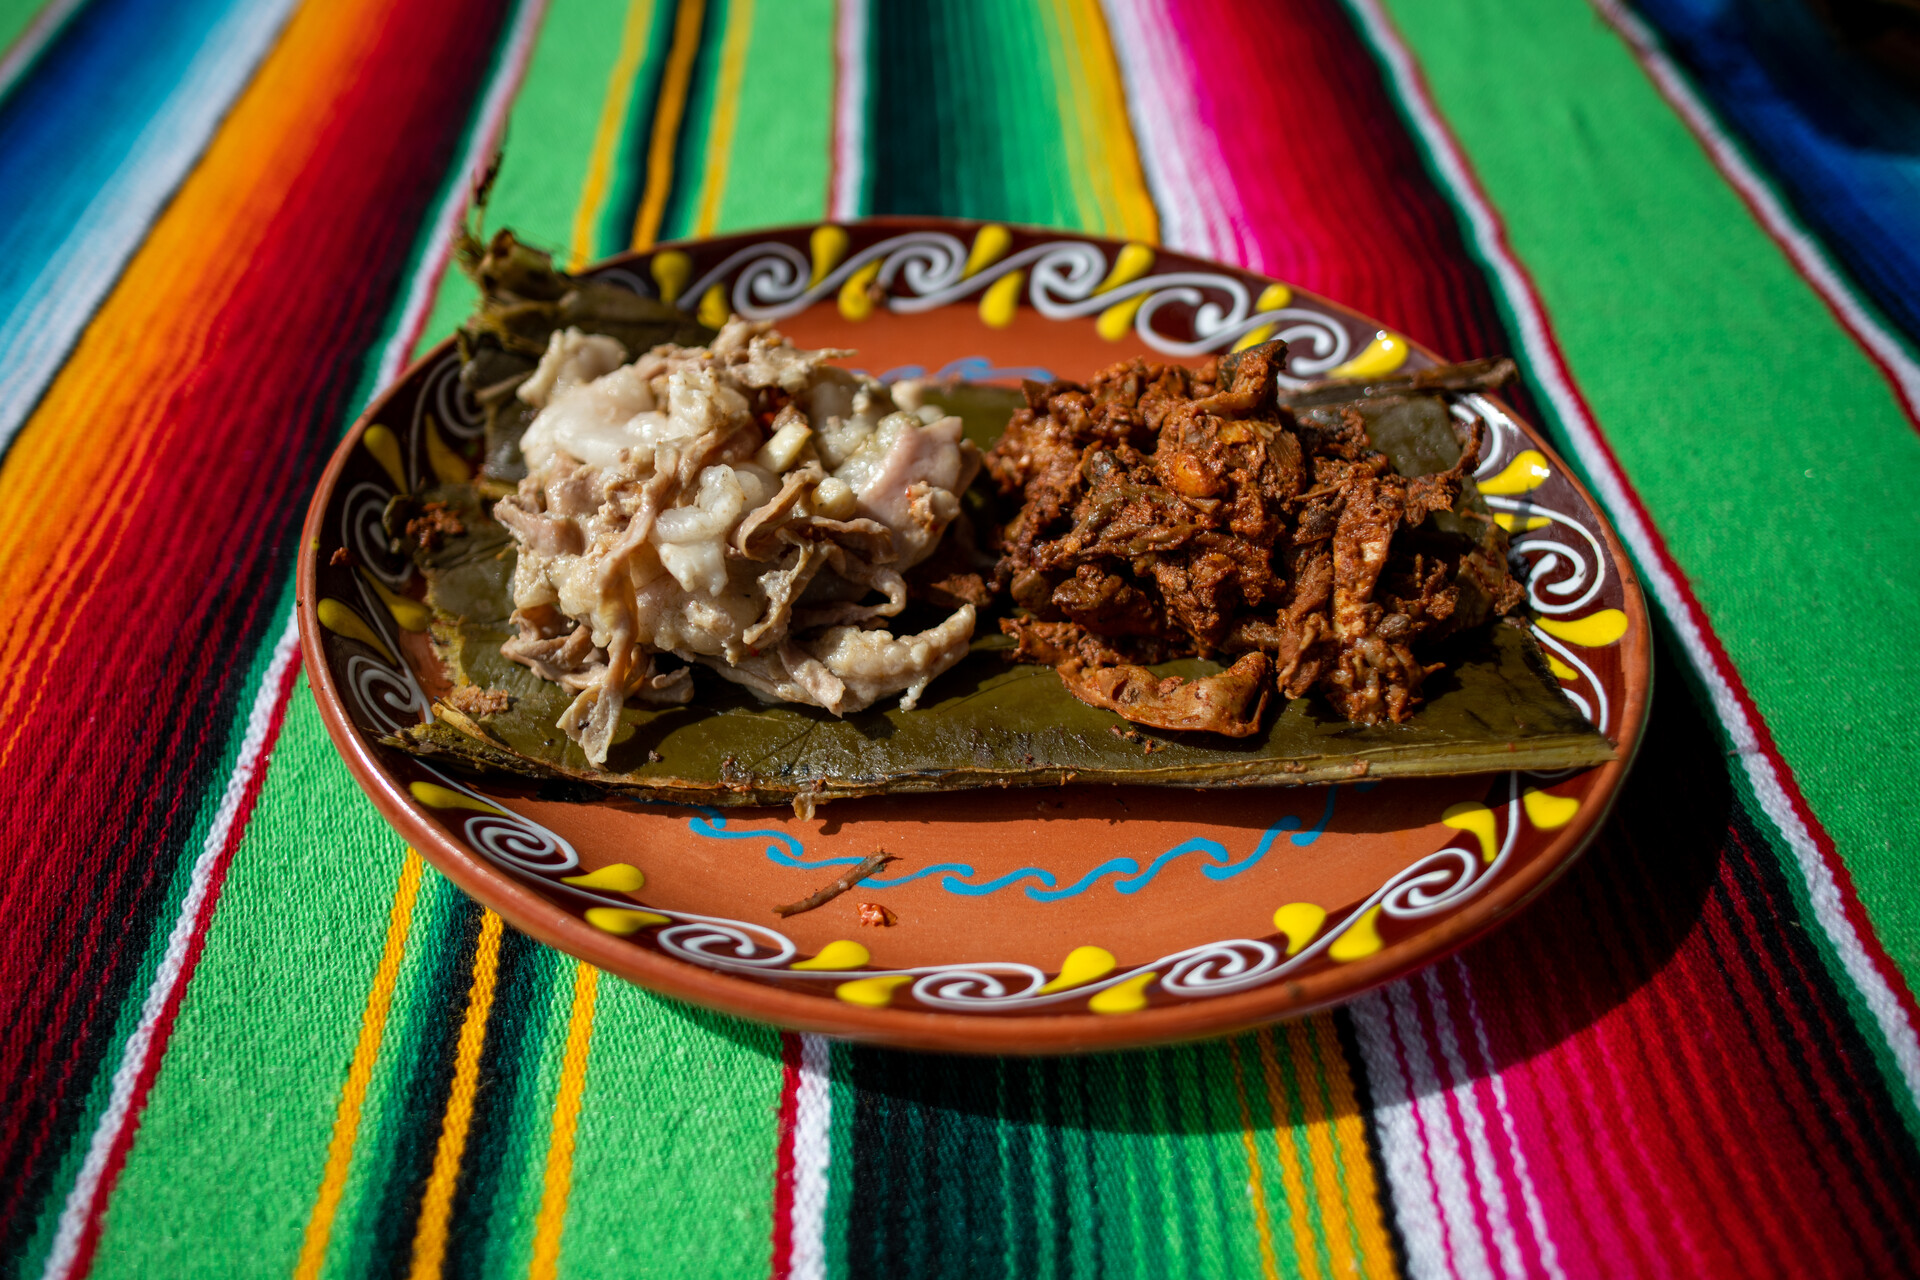 A plate of barbacoa, white on one side, red on the other, on a rainbow striped tablecloth.